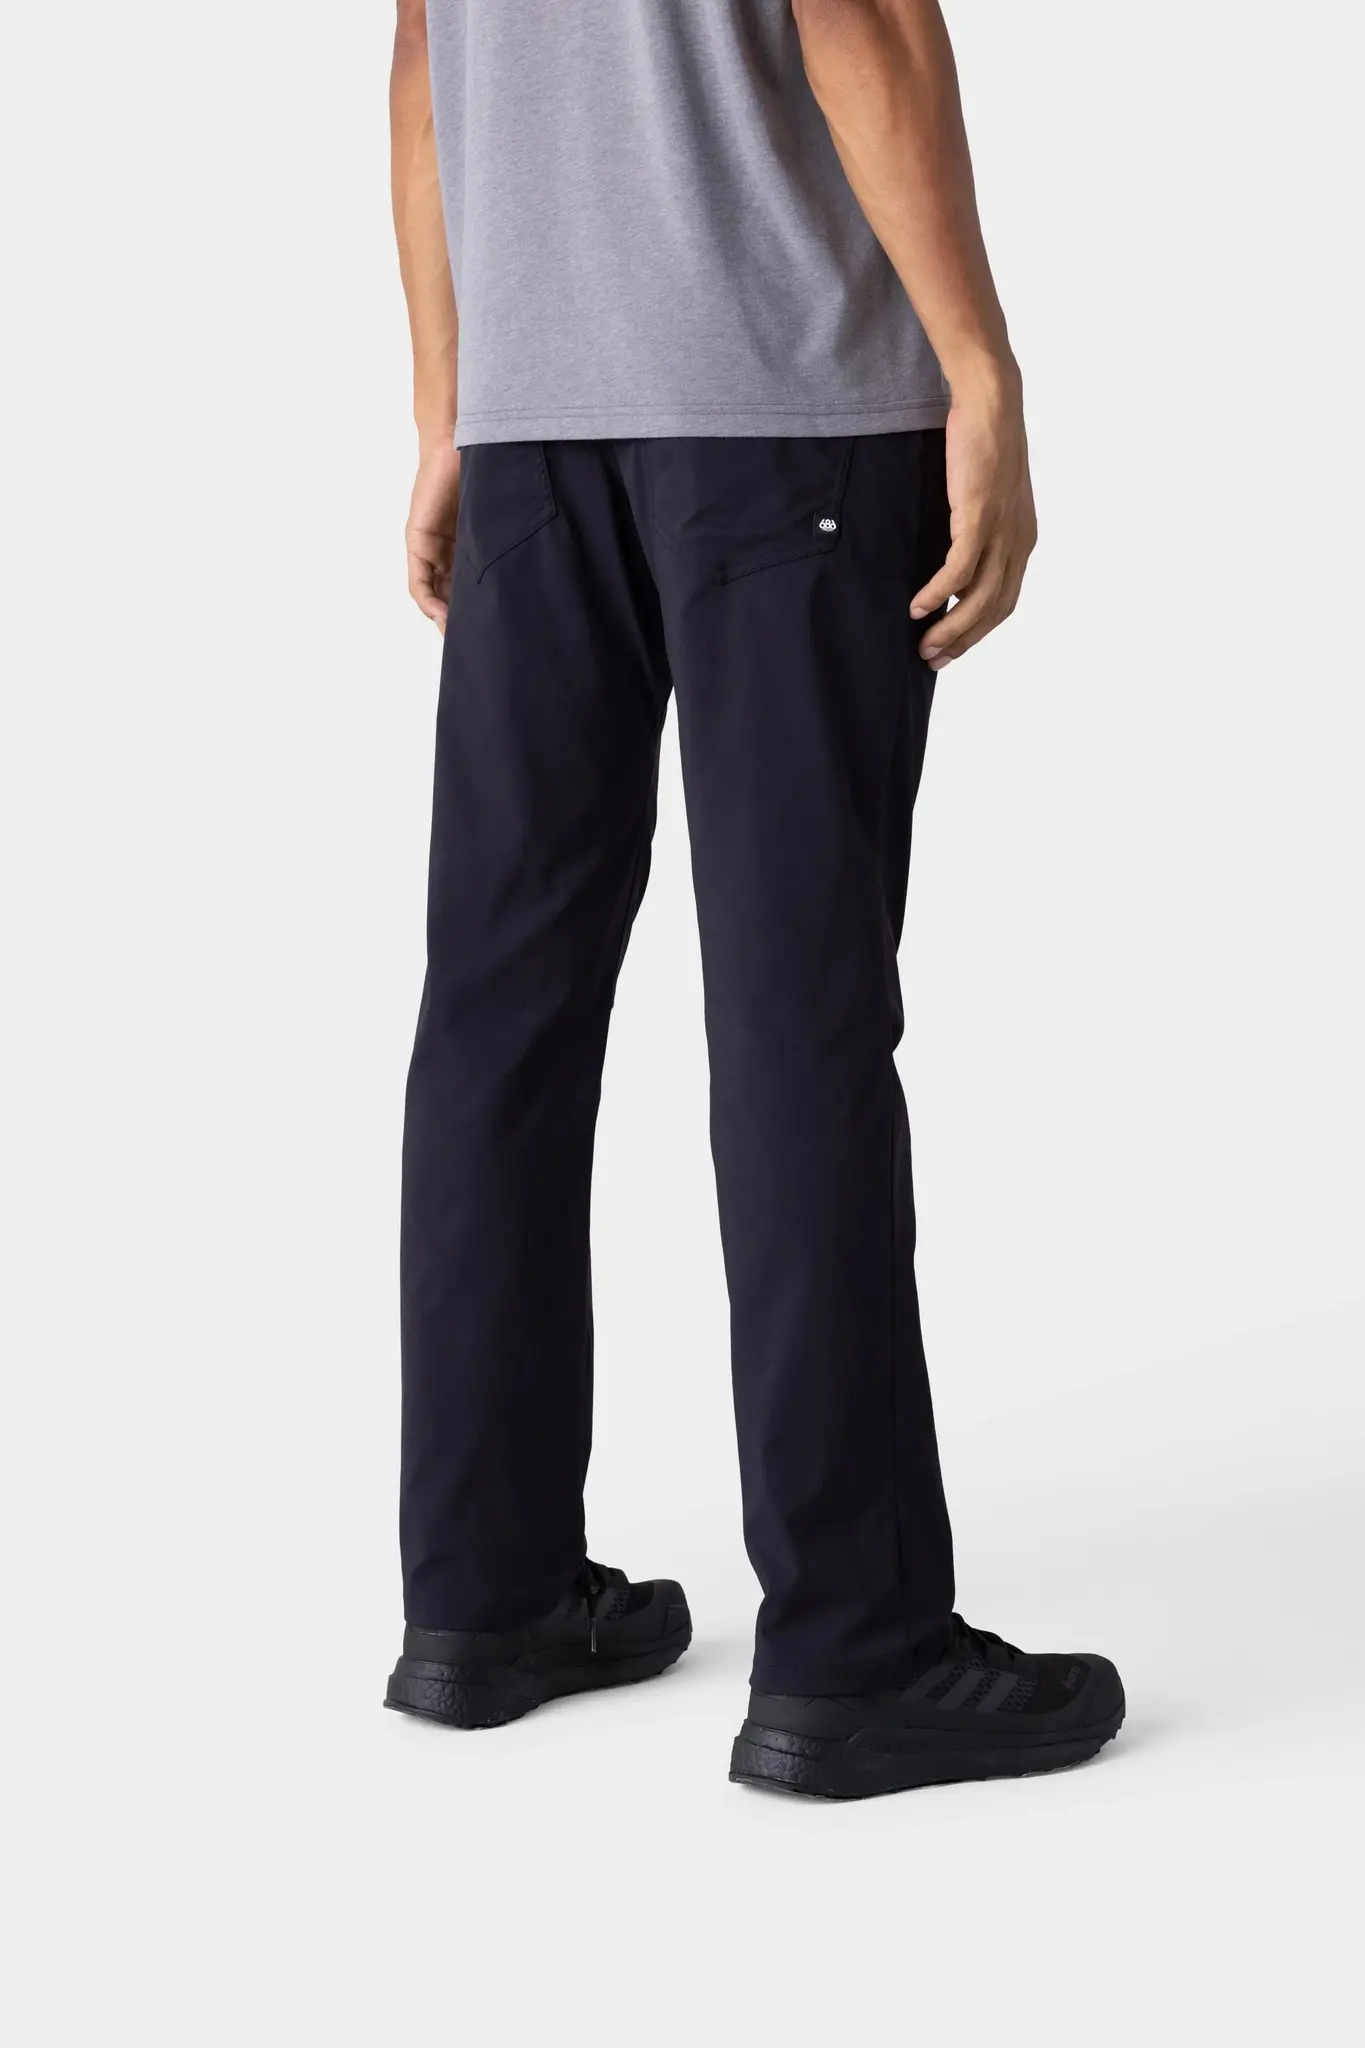 686 Men's Everywhere Pant Relaxed - Outtabounds